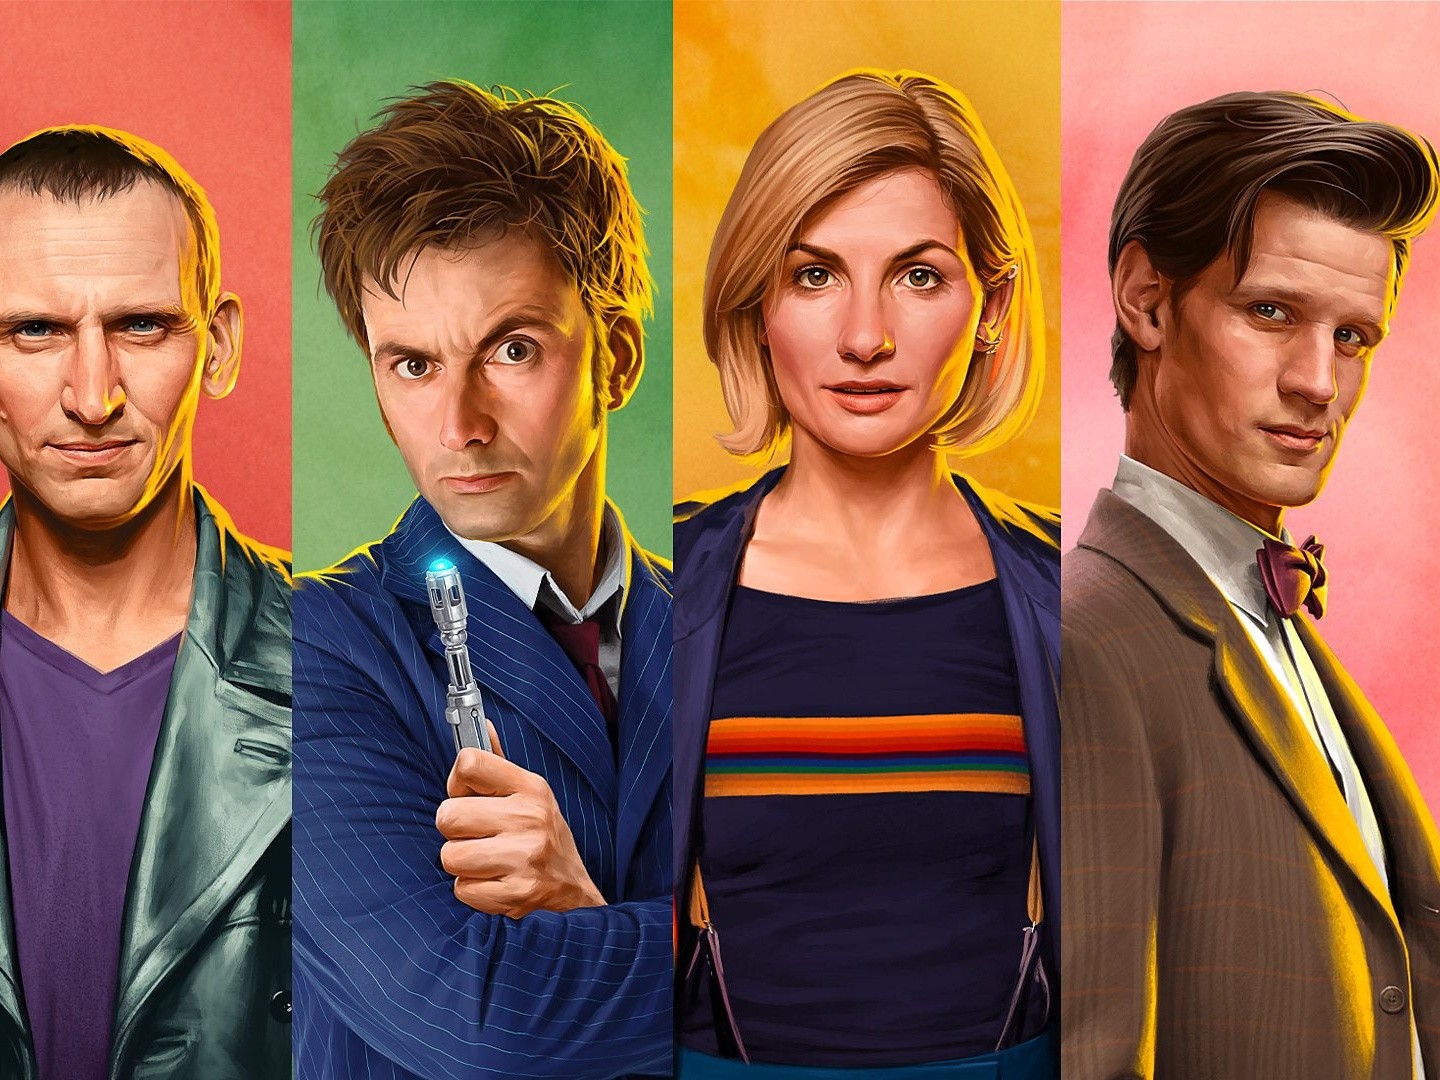 Doctor Who, Plot, Characters, Actors, & Facts